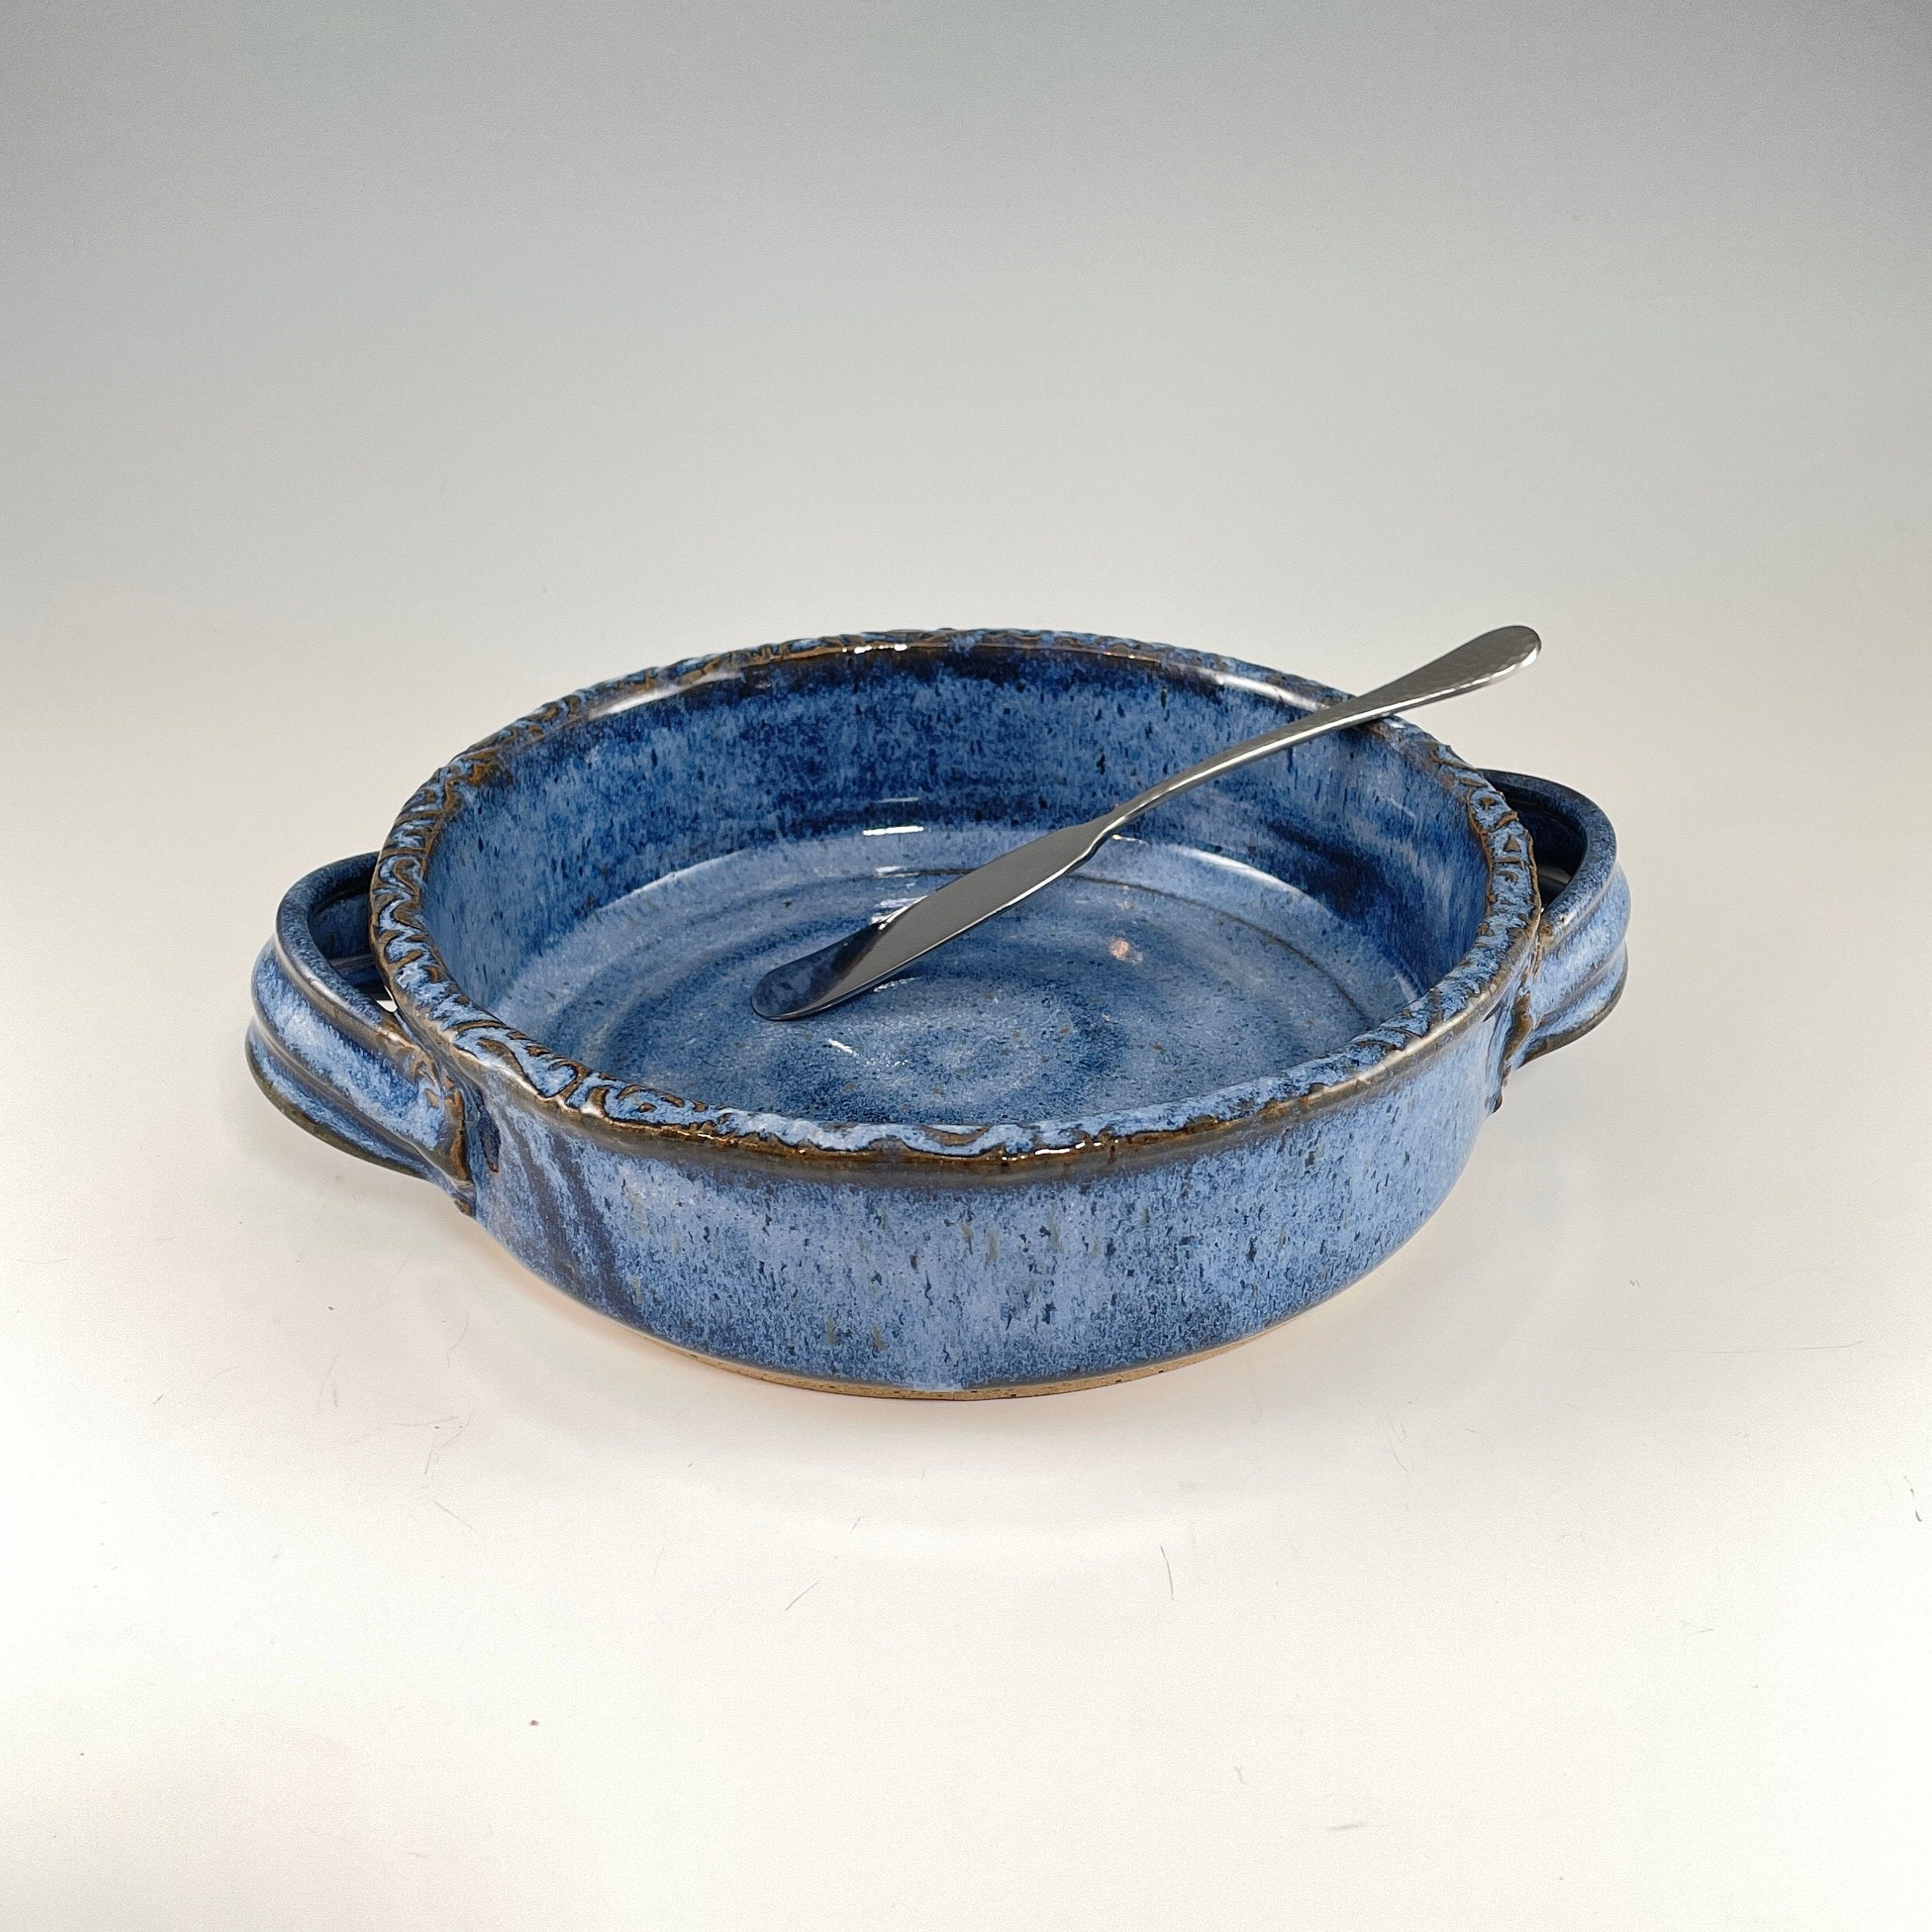 Brie Baker pottery baking dish. Ceramic dish for cheese and layered dips